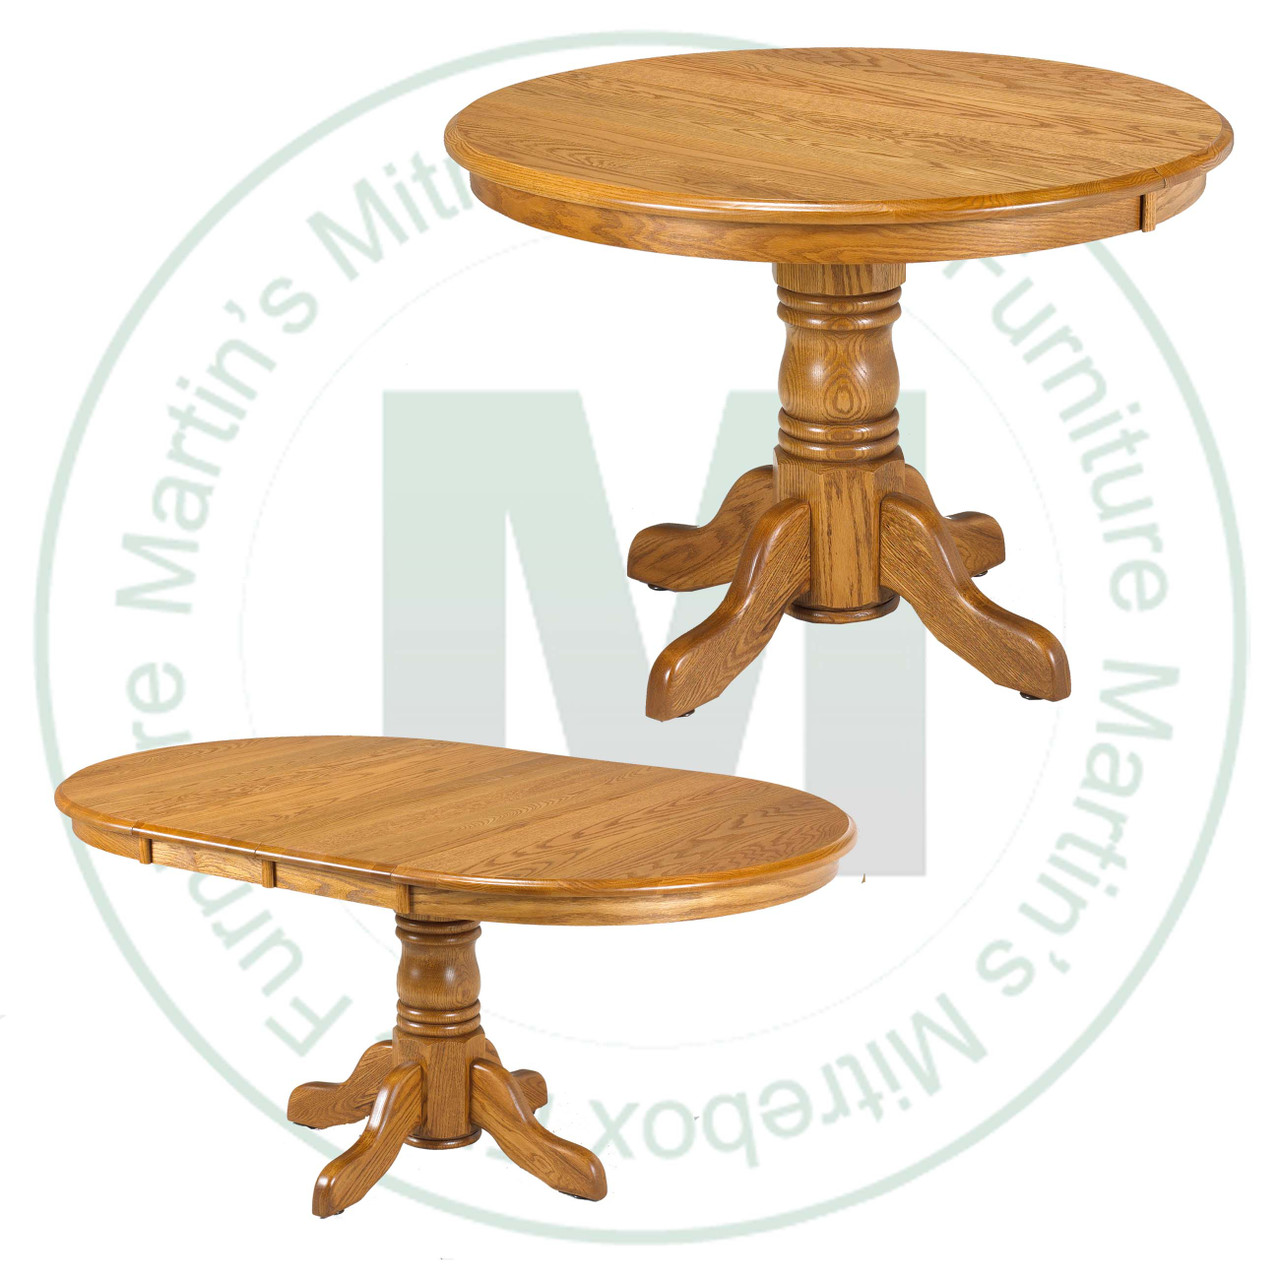 Wormy Maple Lancaster Collection Single Pedestal Table 54''D x 54''W x 30''H With 1 - 12'' Leaf. Table Has 1.25'' Thick Top